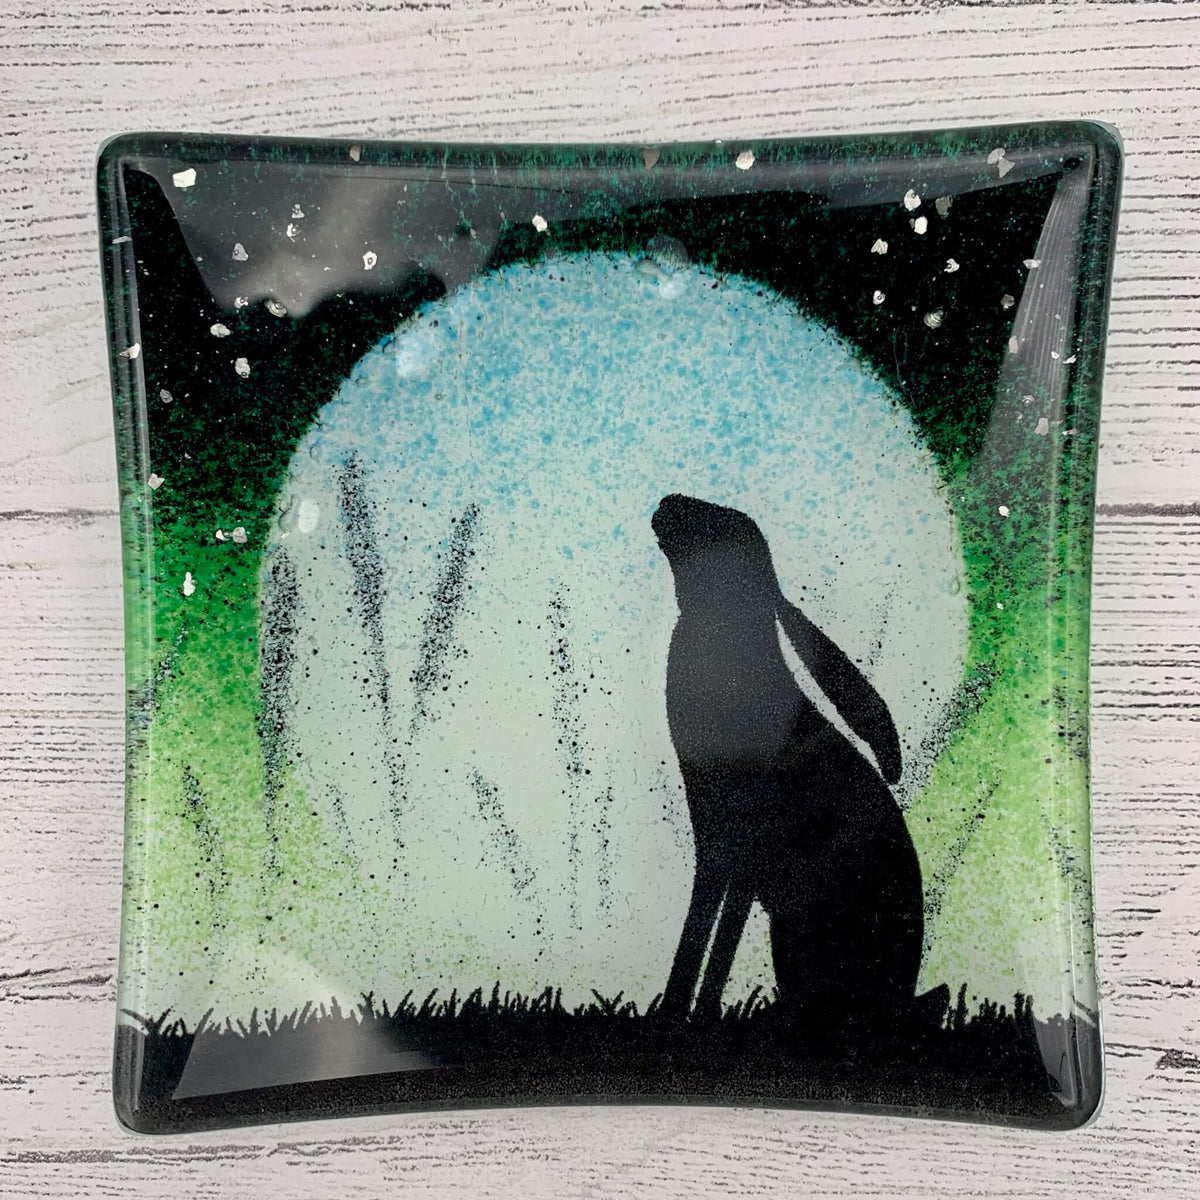 Handcrafted in the uk, fused glass jewellery dish in green, with a hare silhouette, large moon and glitter for stars.